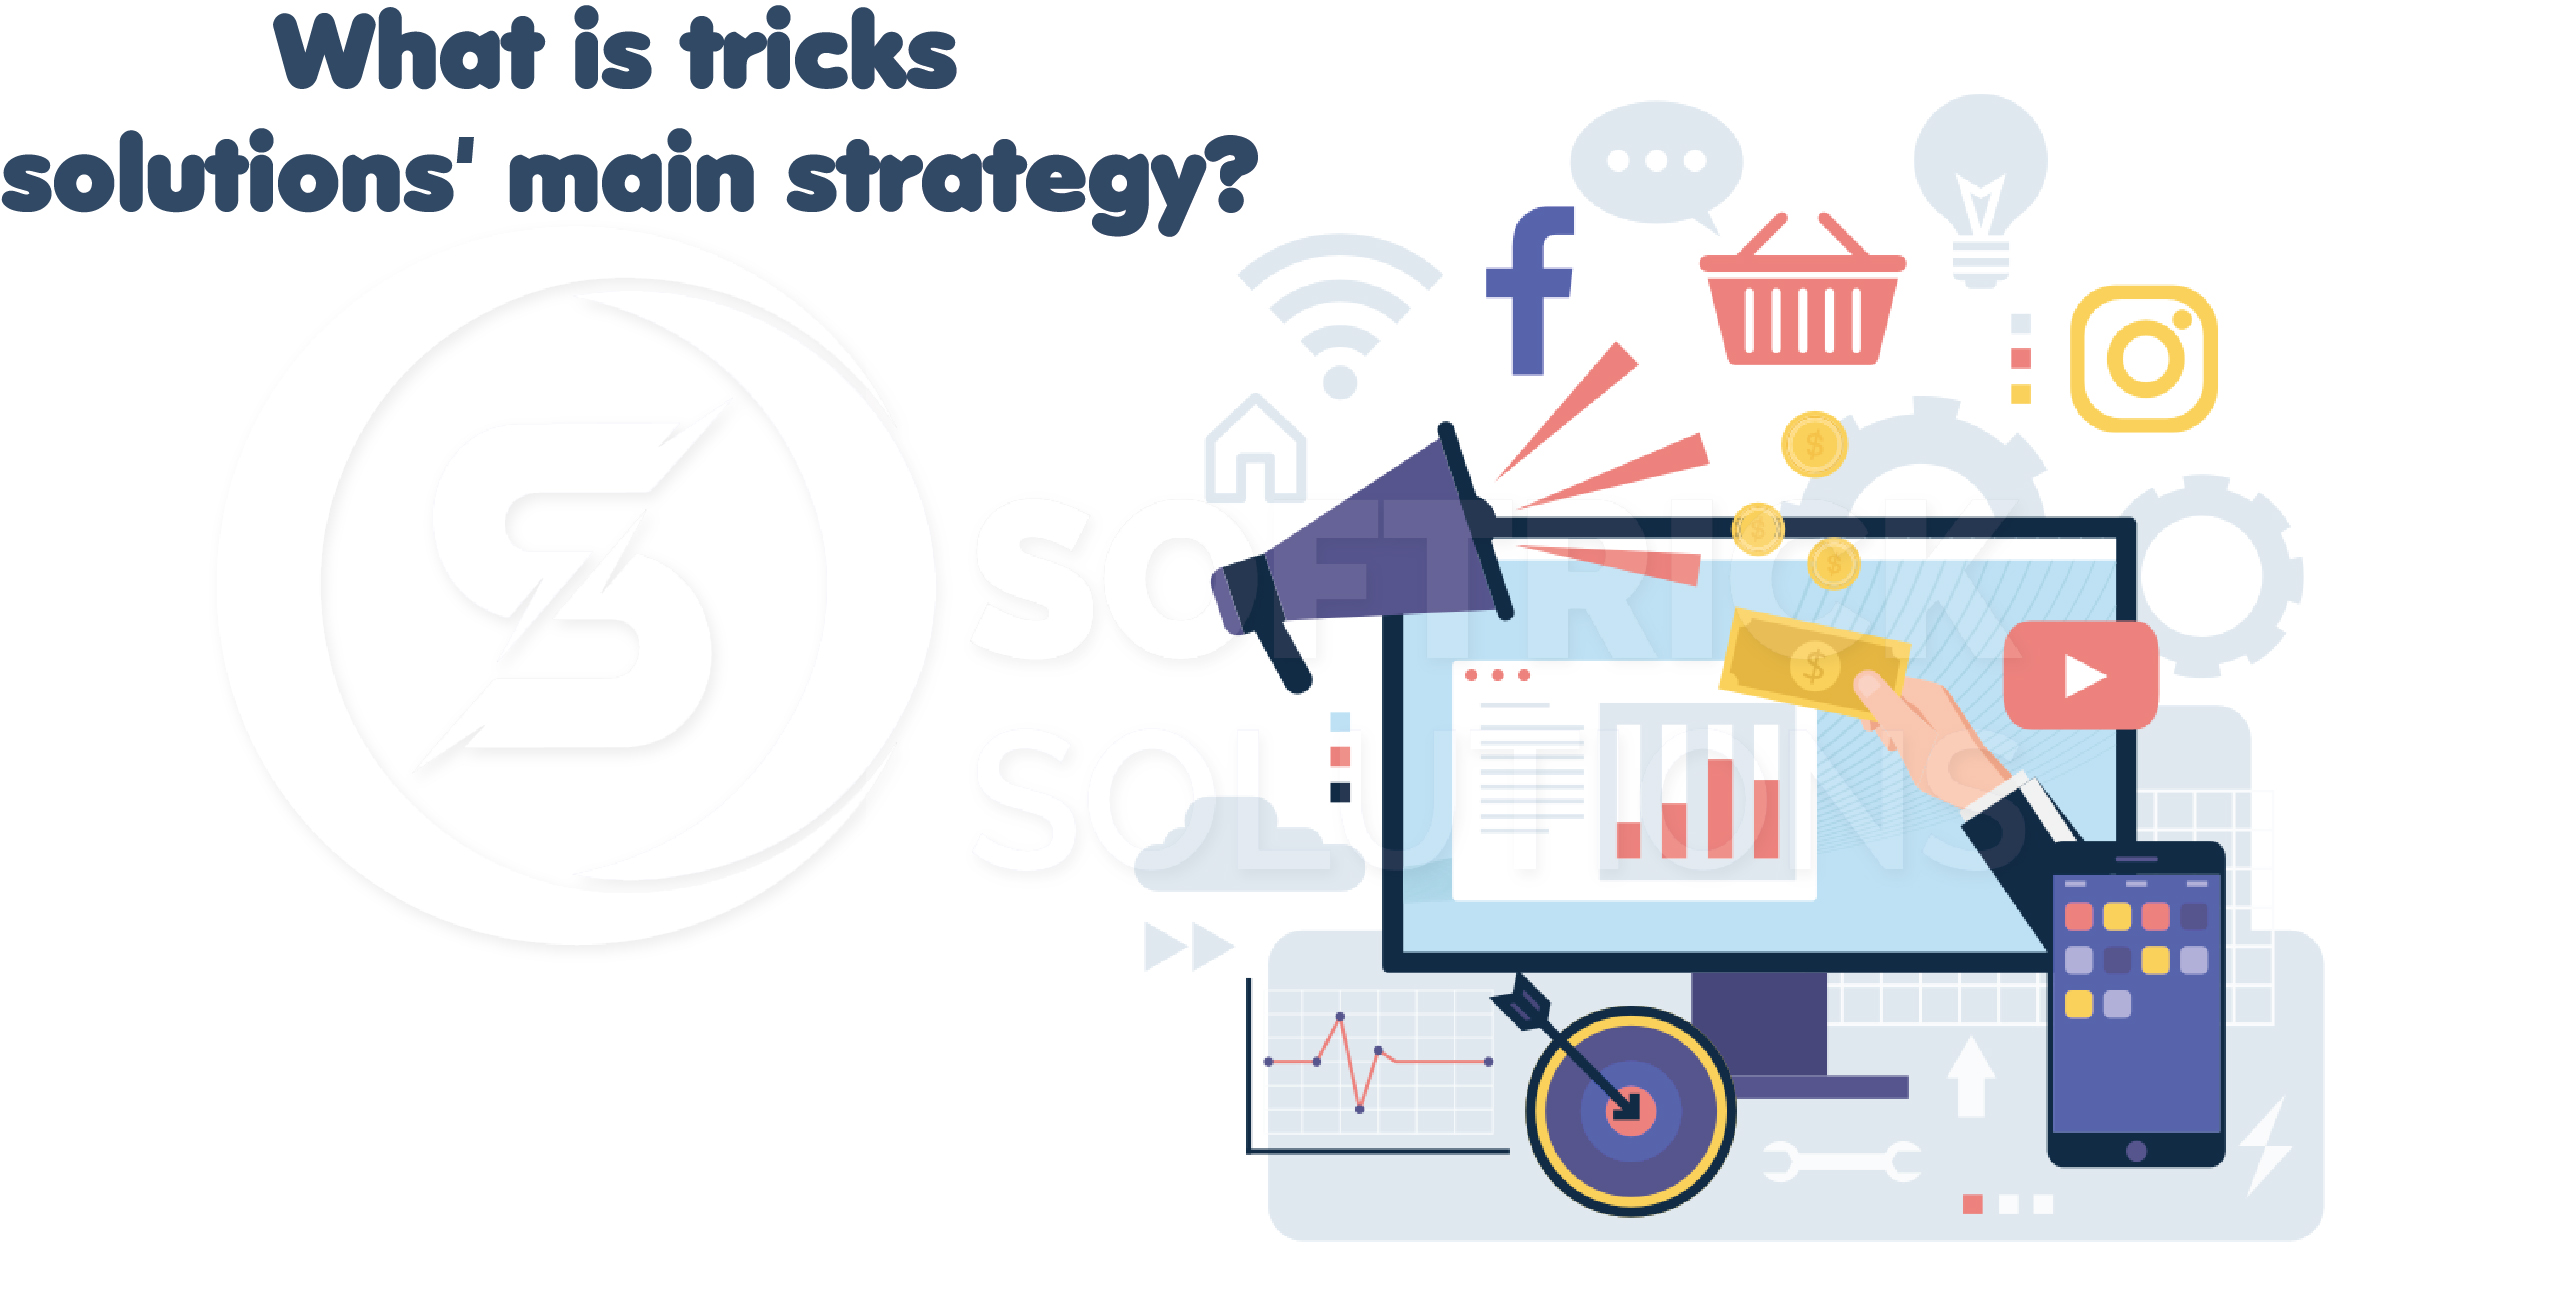 What is tricks solutions' main strategy